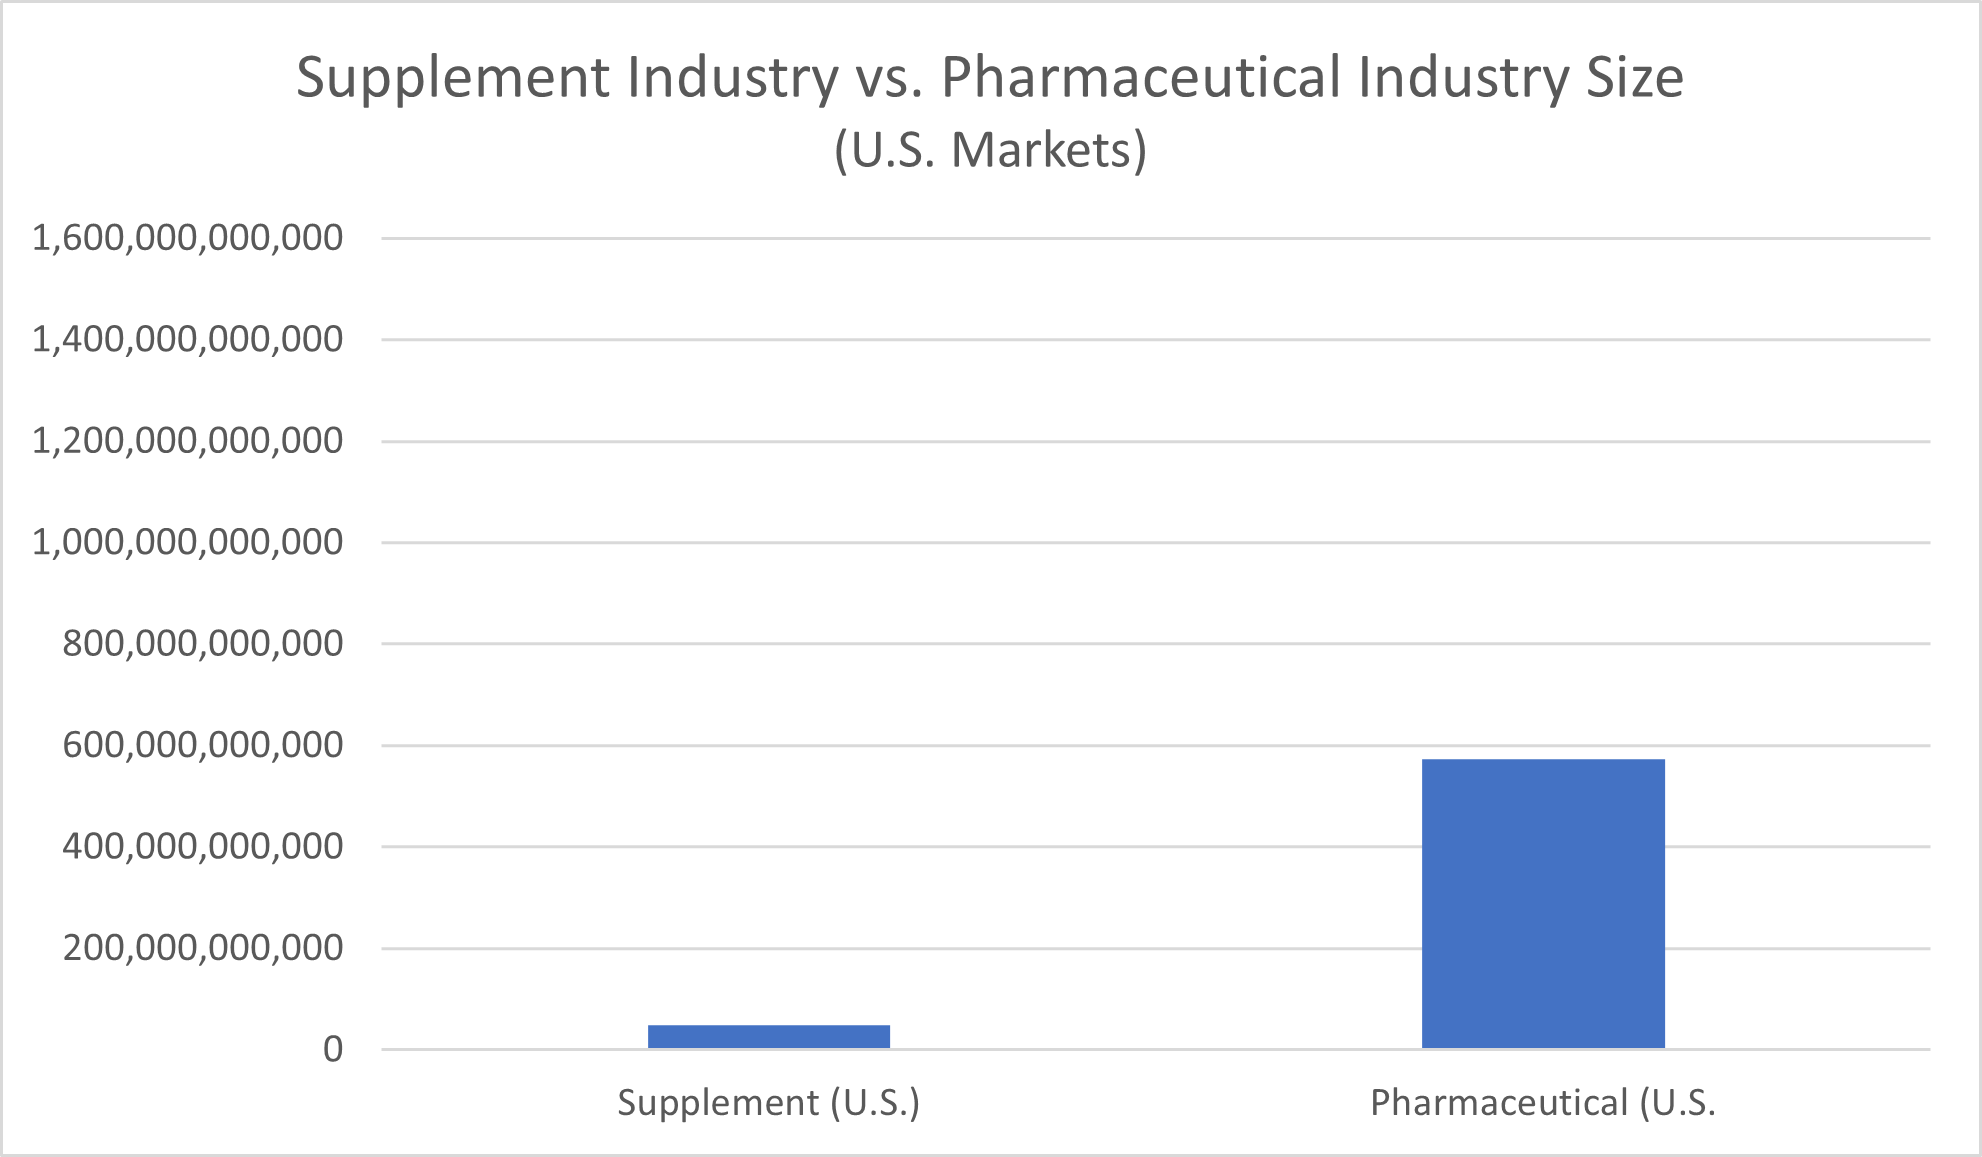 Pharmaceutical vs supplements industry size - U.S. markets